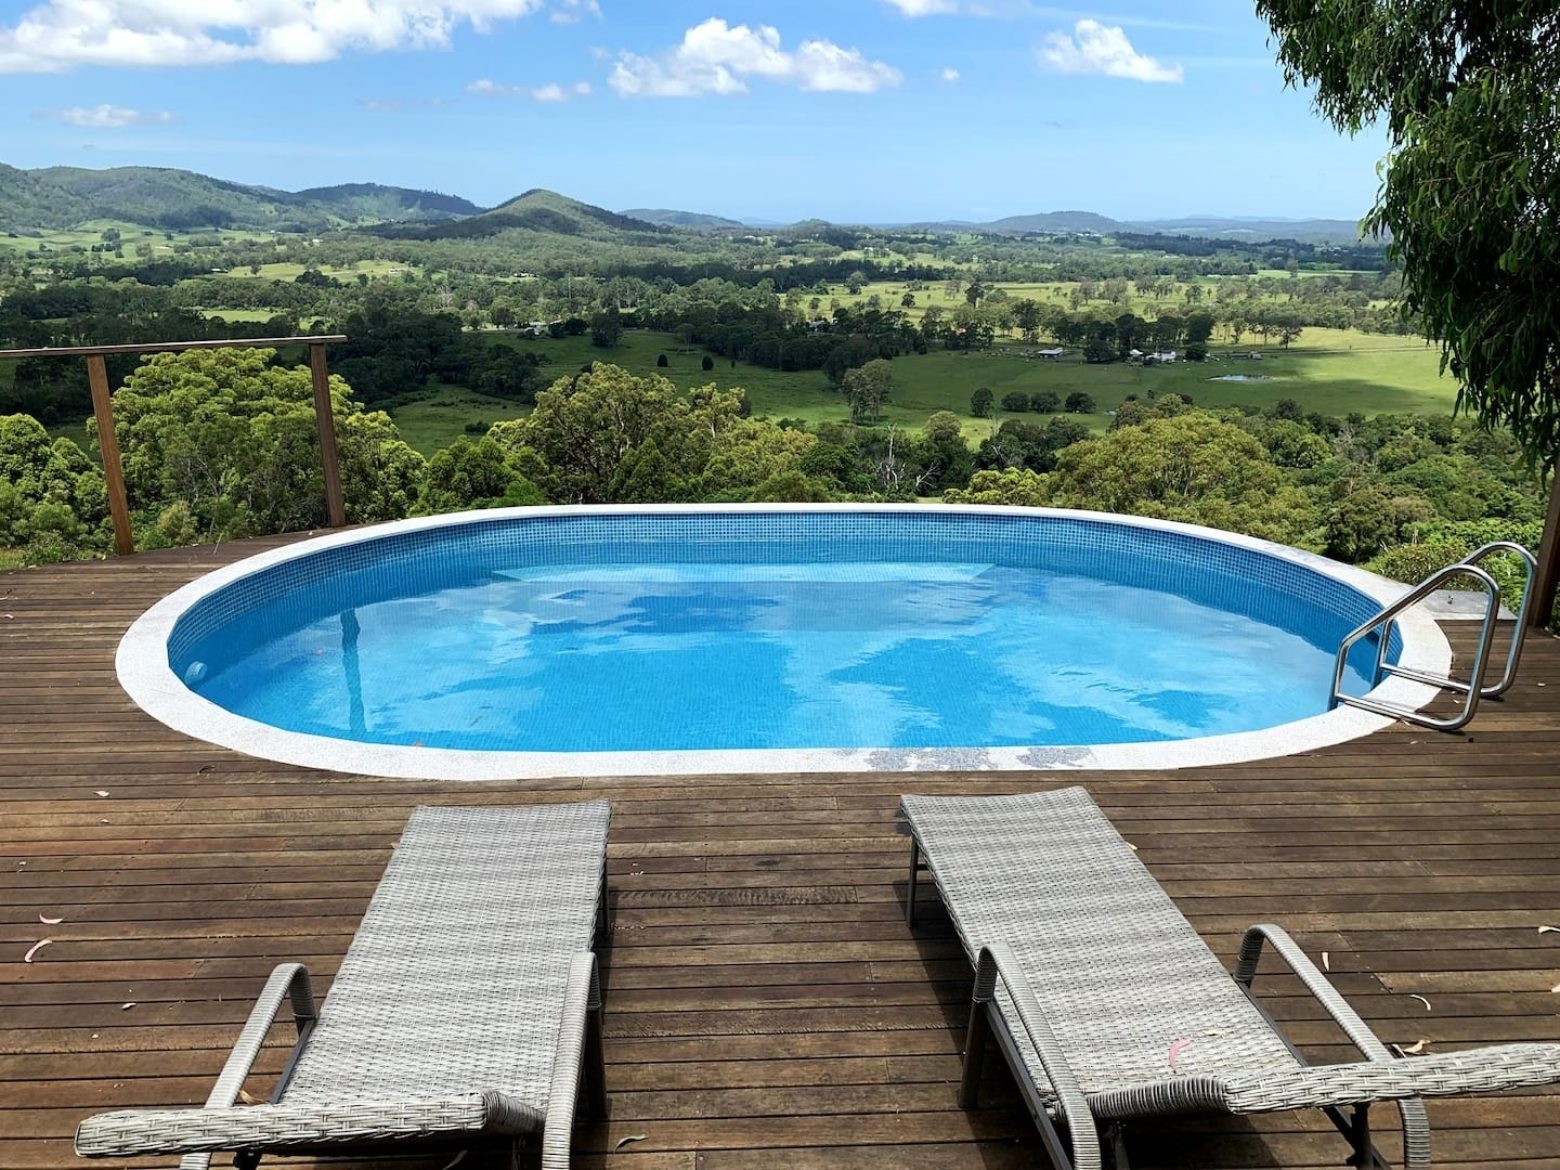 Dungannon Eco Retreat pool with view at Krambach.